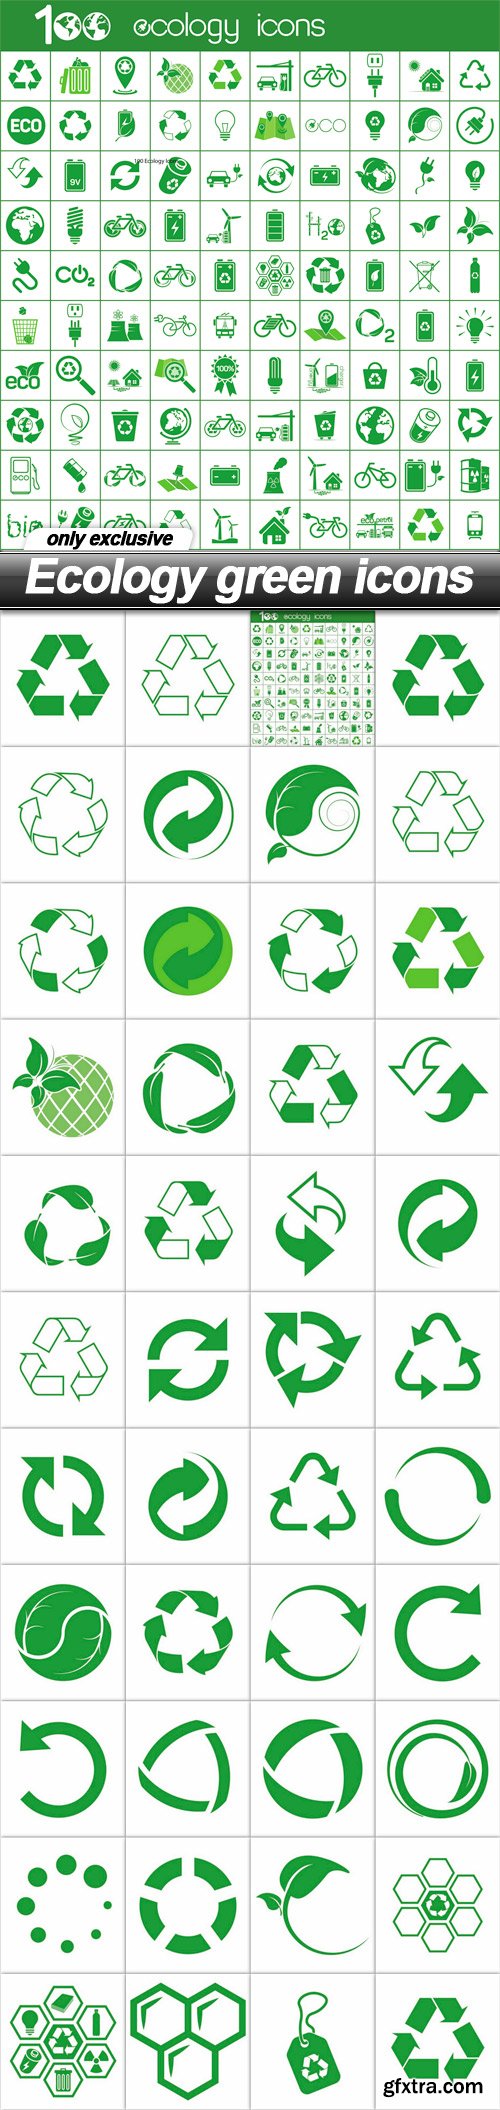 Ecology green icons - 43 EPS